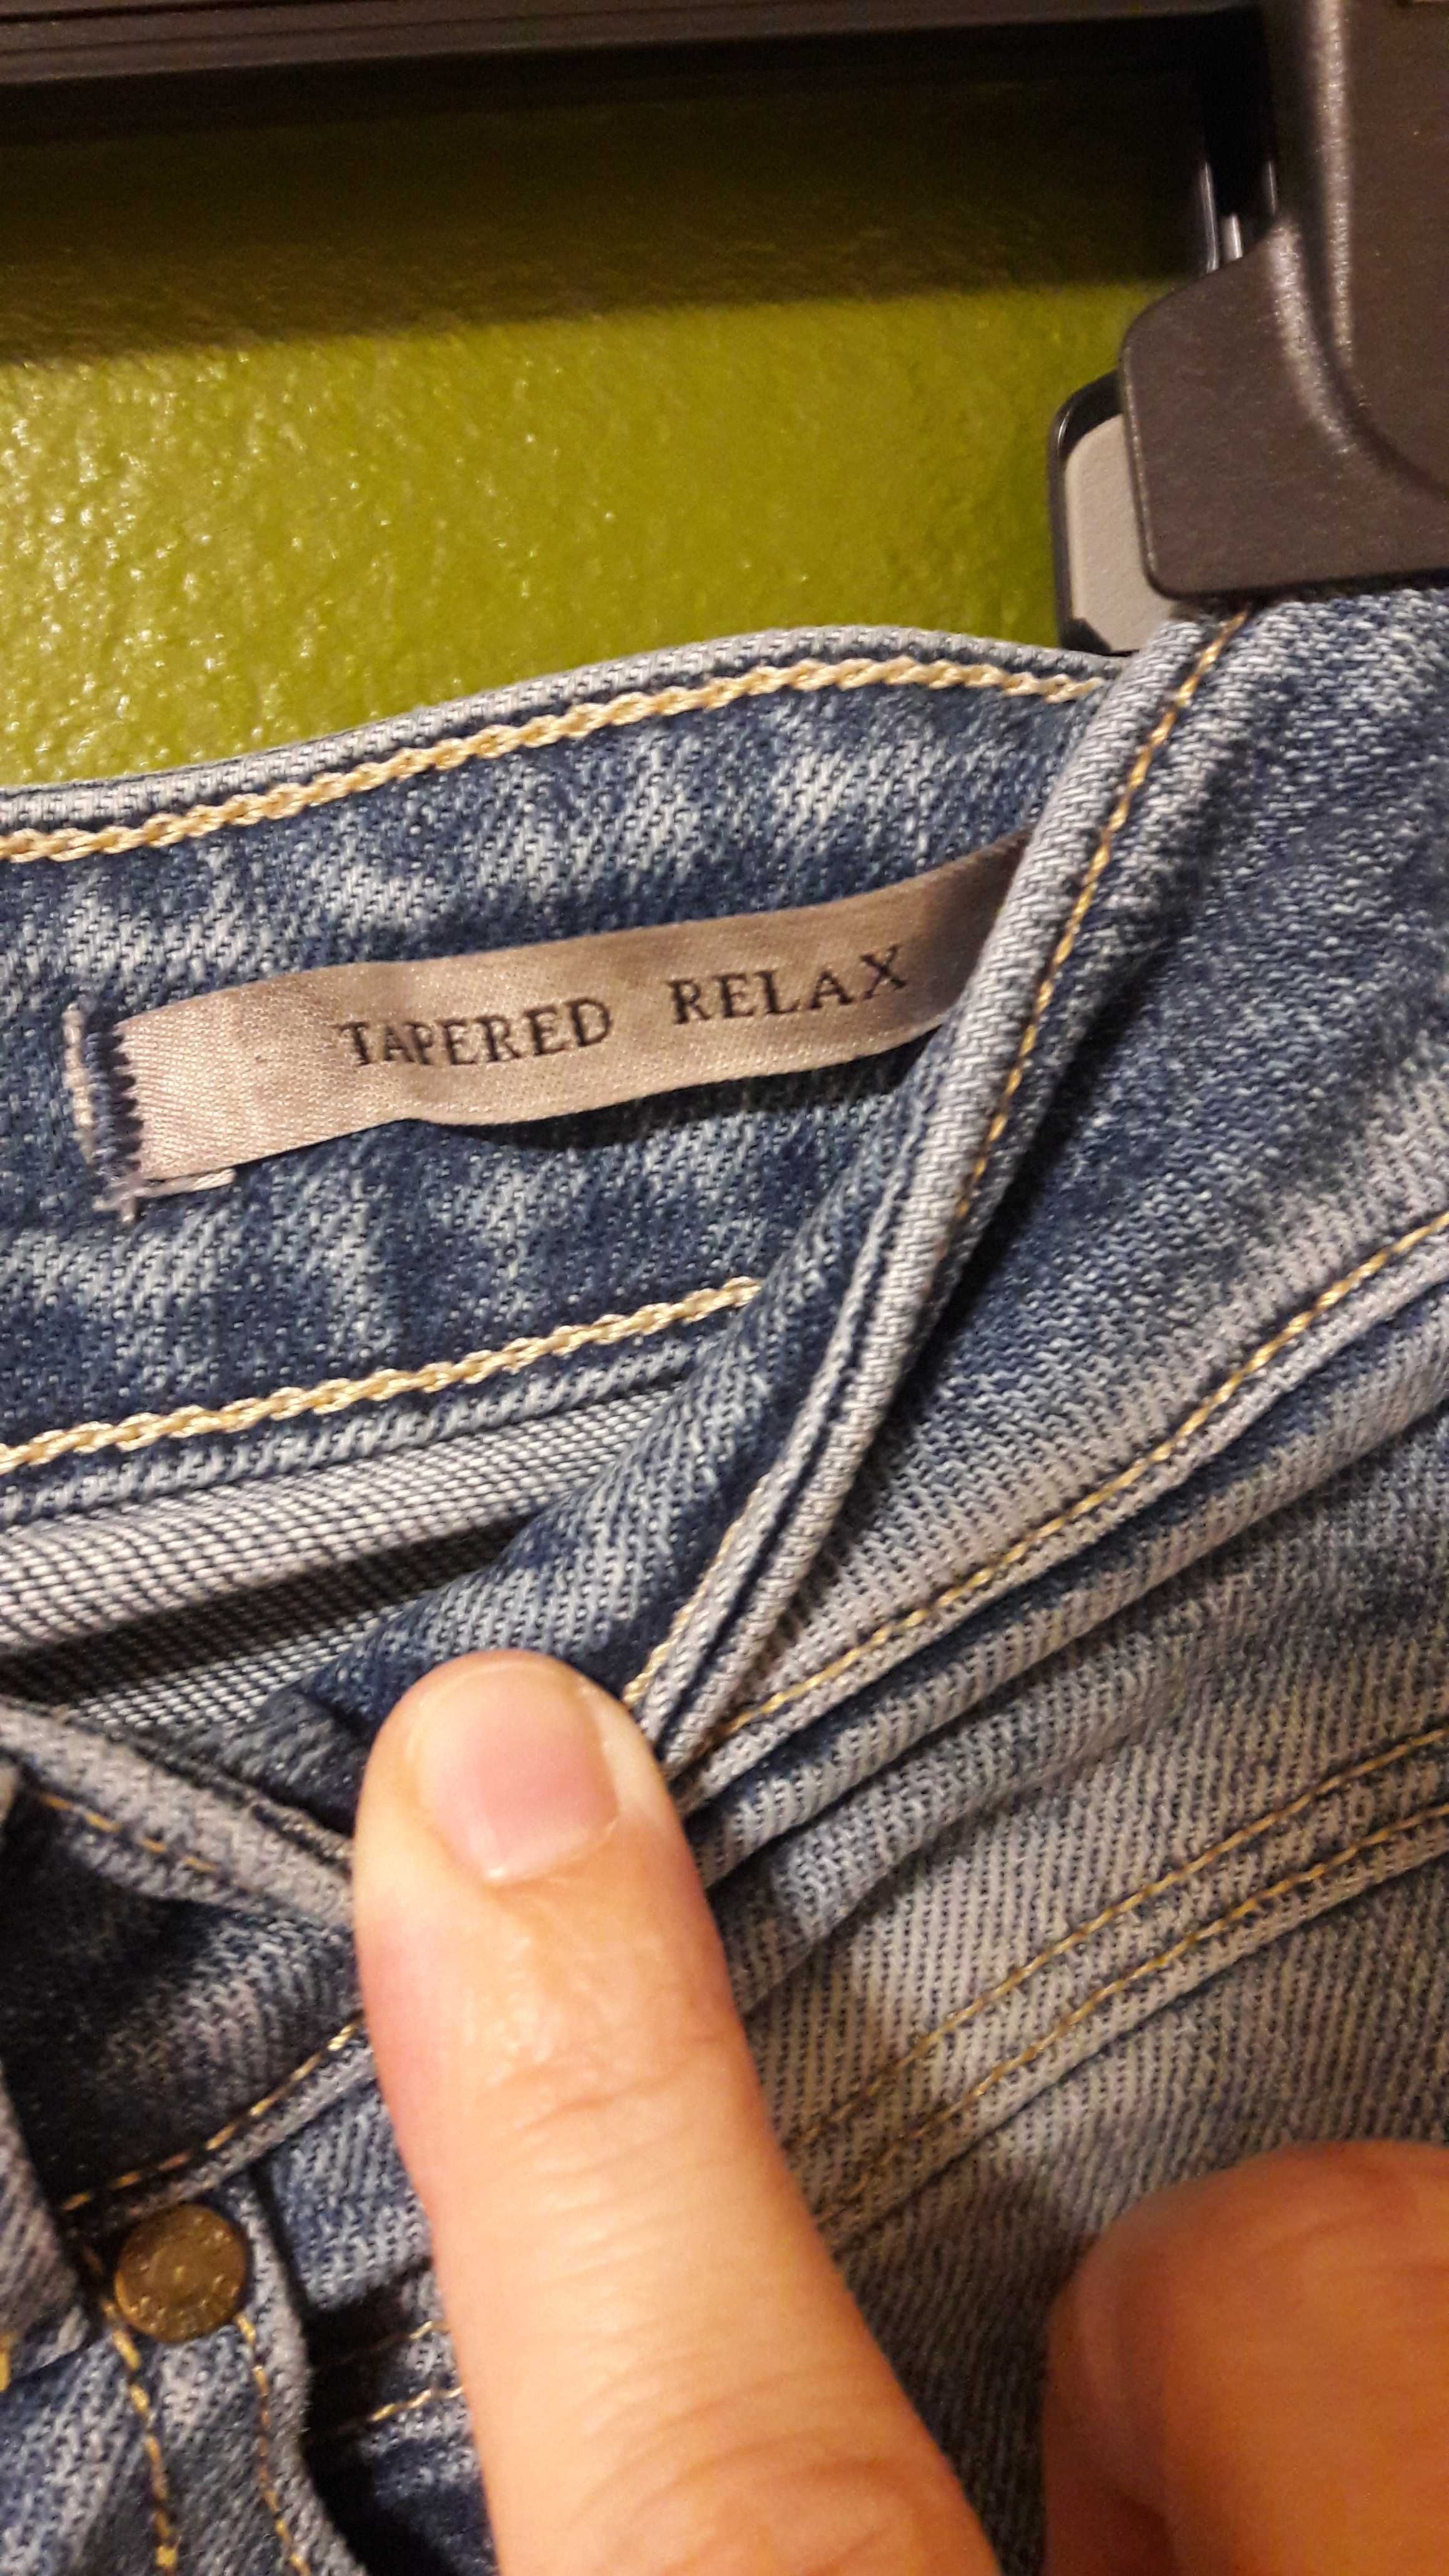 spodnie jeans Guess 26 Tapered Relax